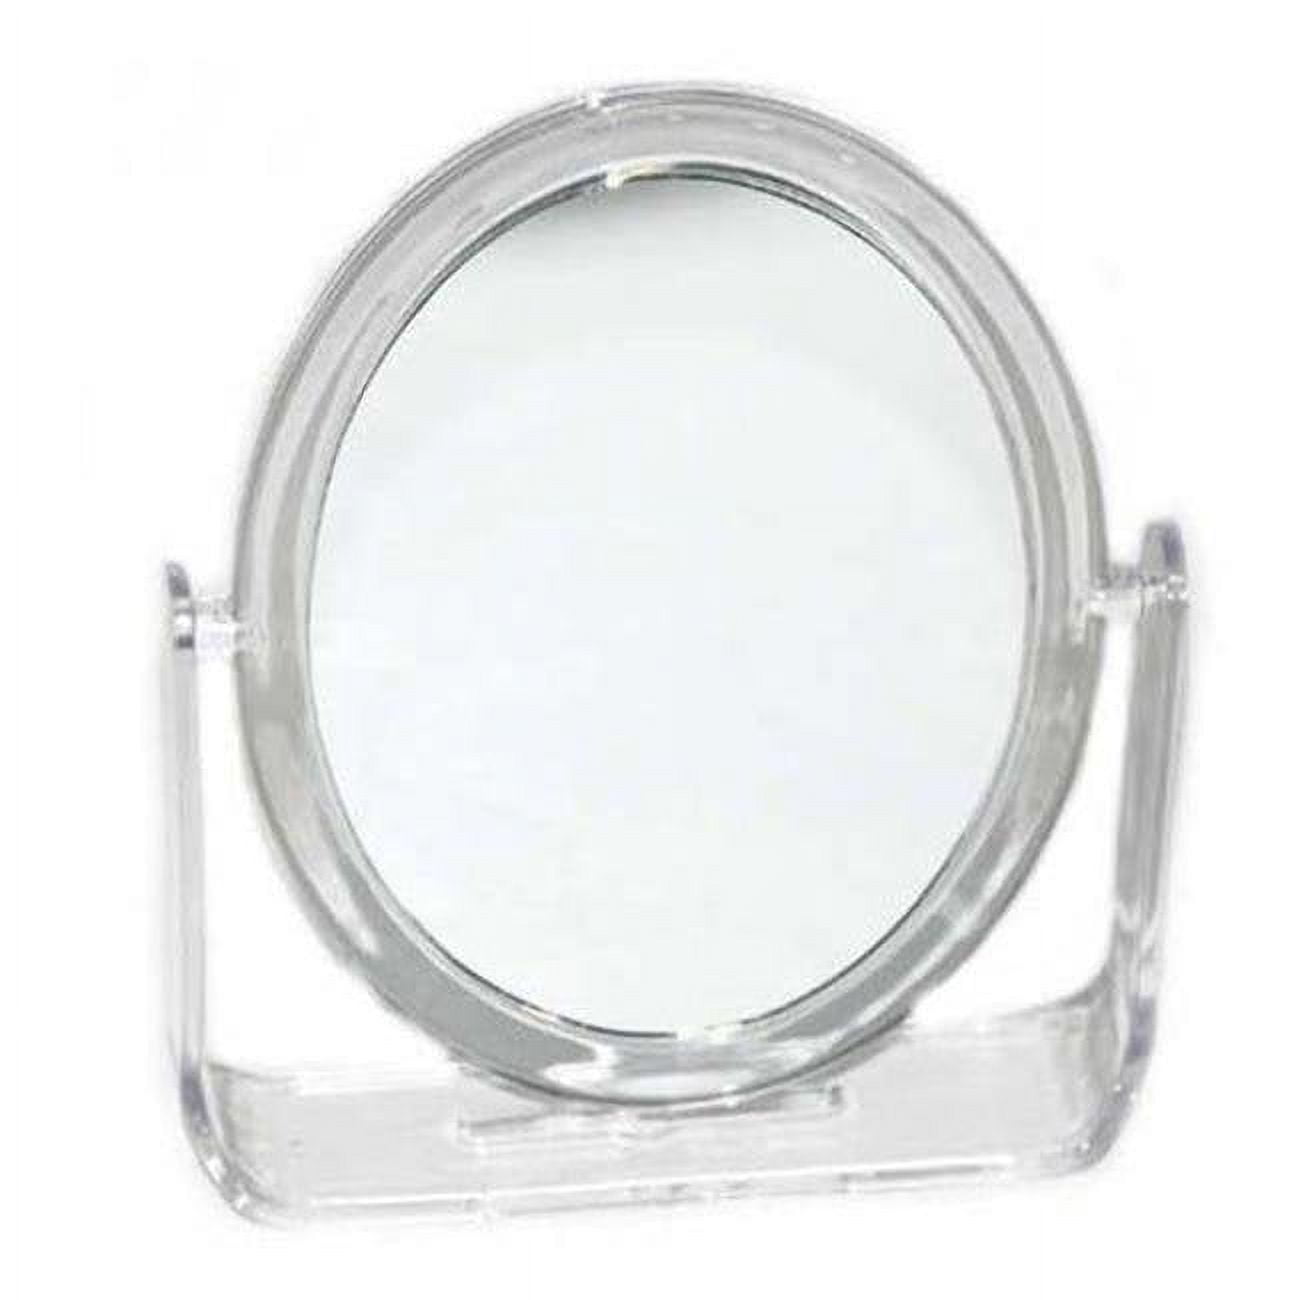 2329743 8.07 X 6.8 In. Double Sided Mirror - Case Of 24